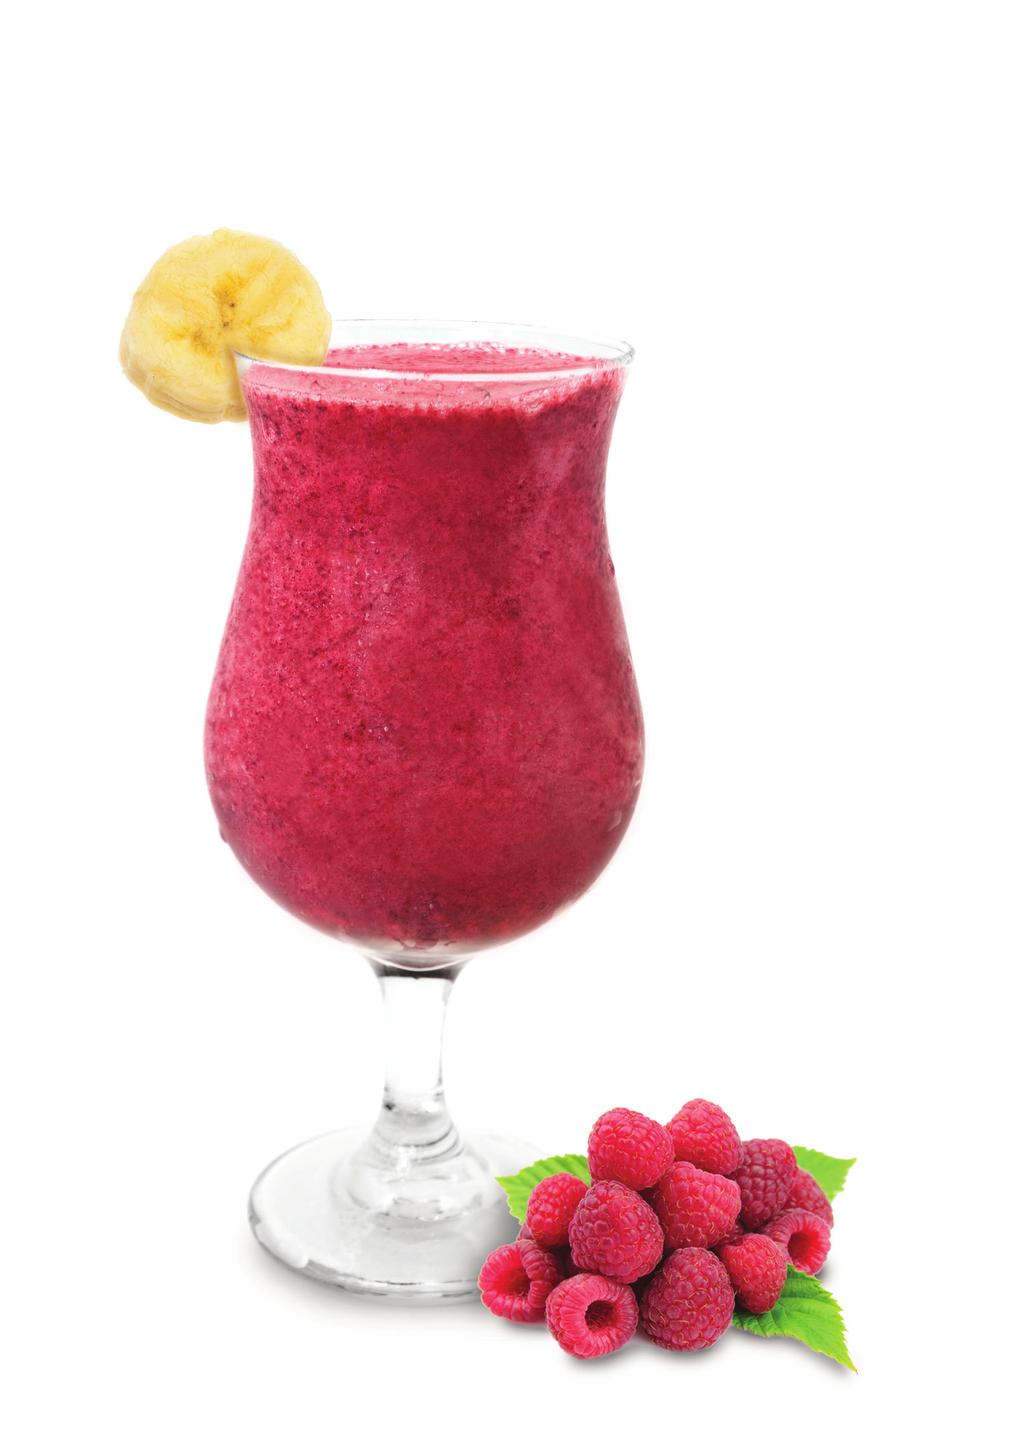 Smoothies Raspberry-Banana Smoothie Ingredients 8-Cup Jar 4-Cup Jar Blend-N-Go Cup Unsweetened soy milk or coconut milk beverage Honey or natural cane sugar 1-1/3 cups 1-1/3 cups 2/3 cup 1 to 2